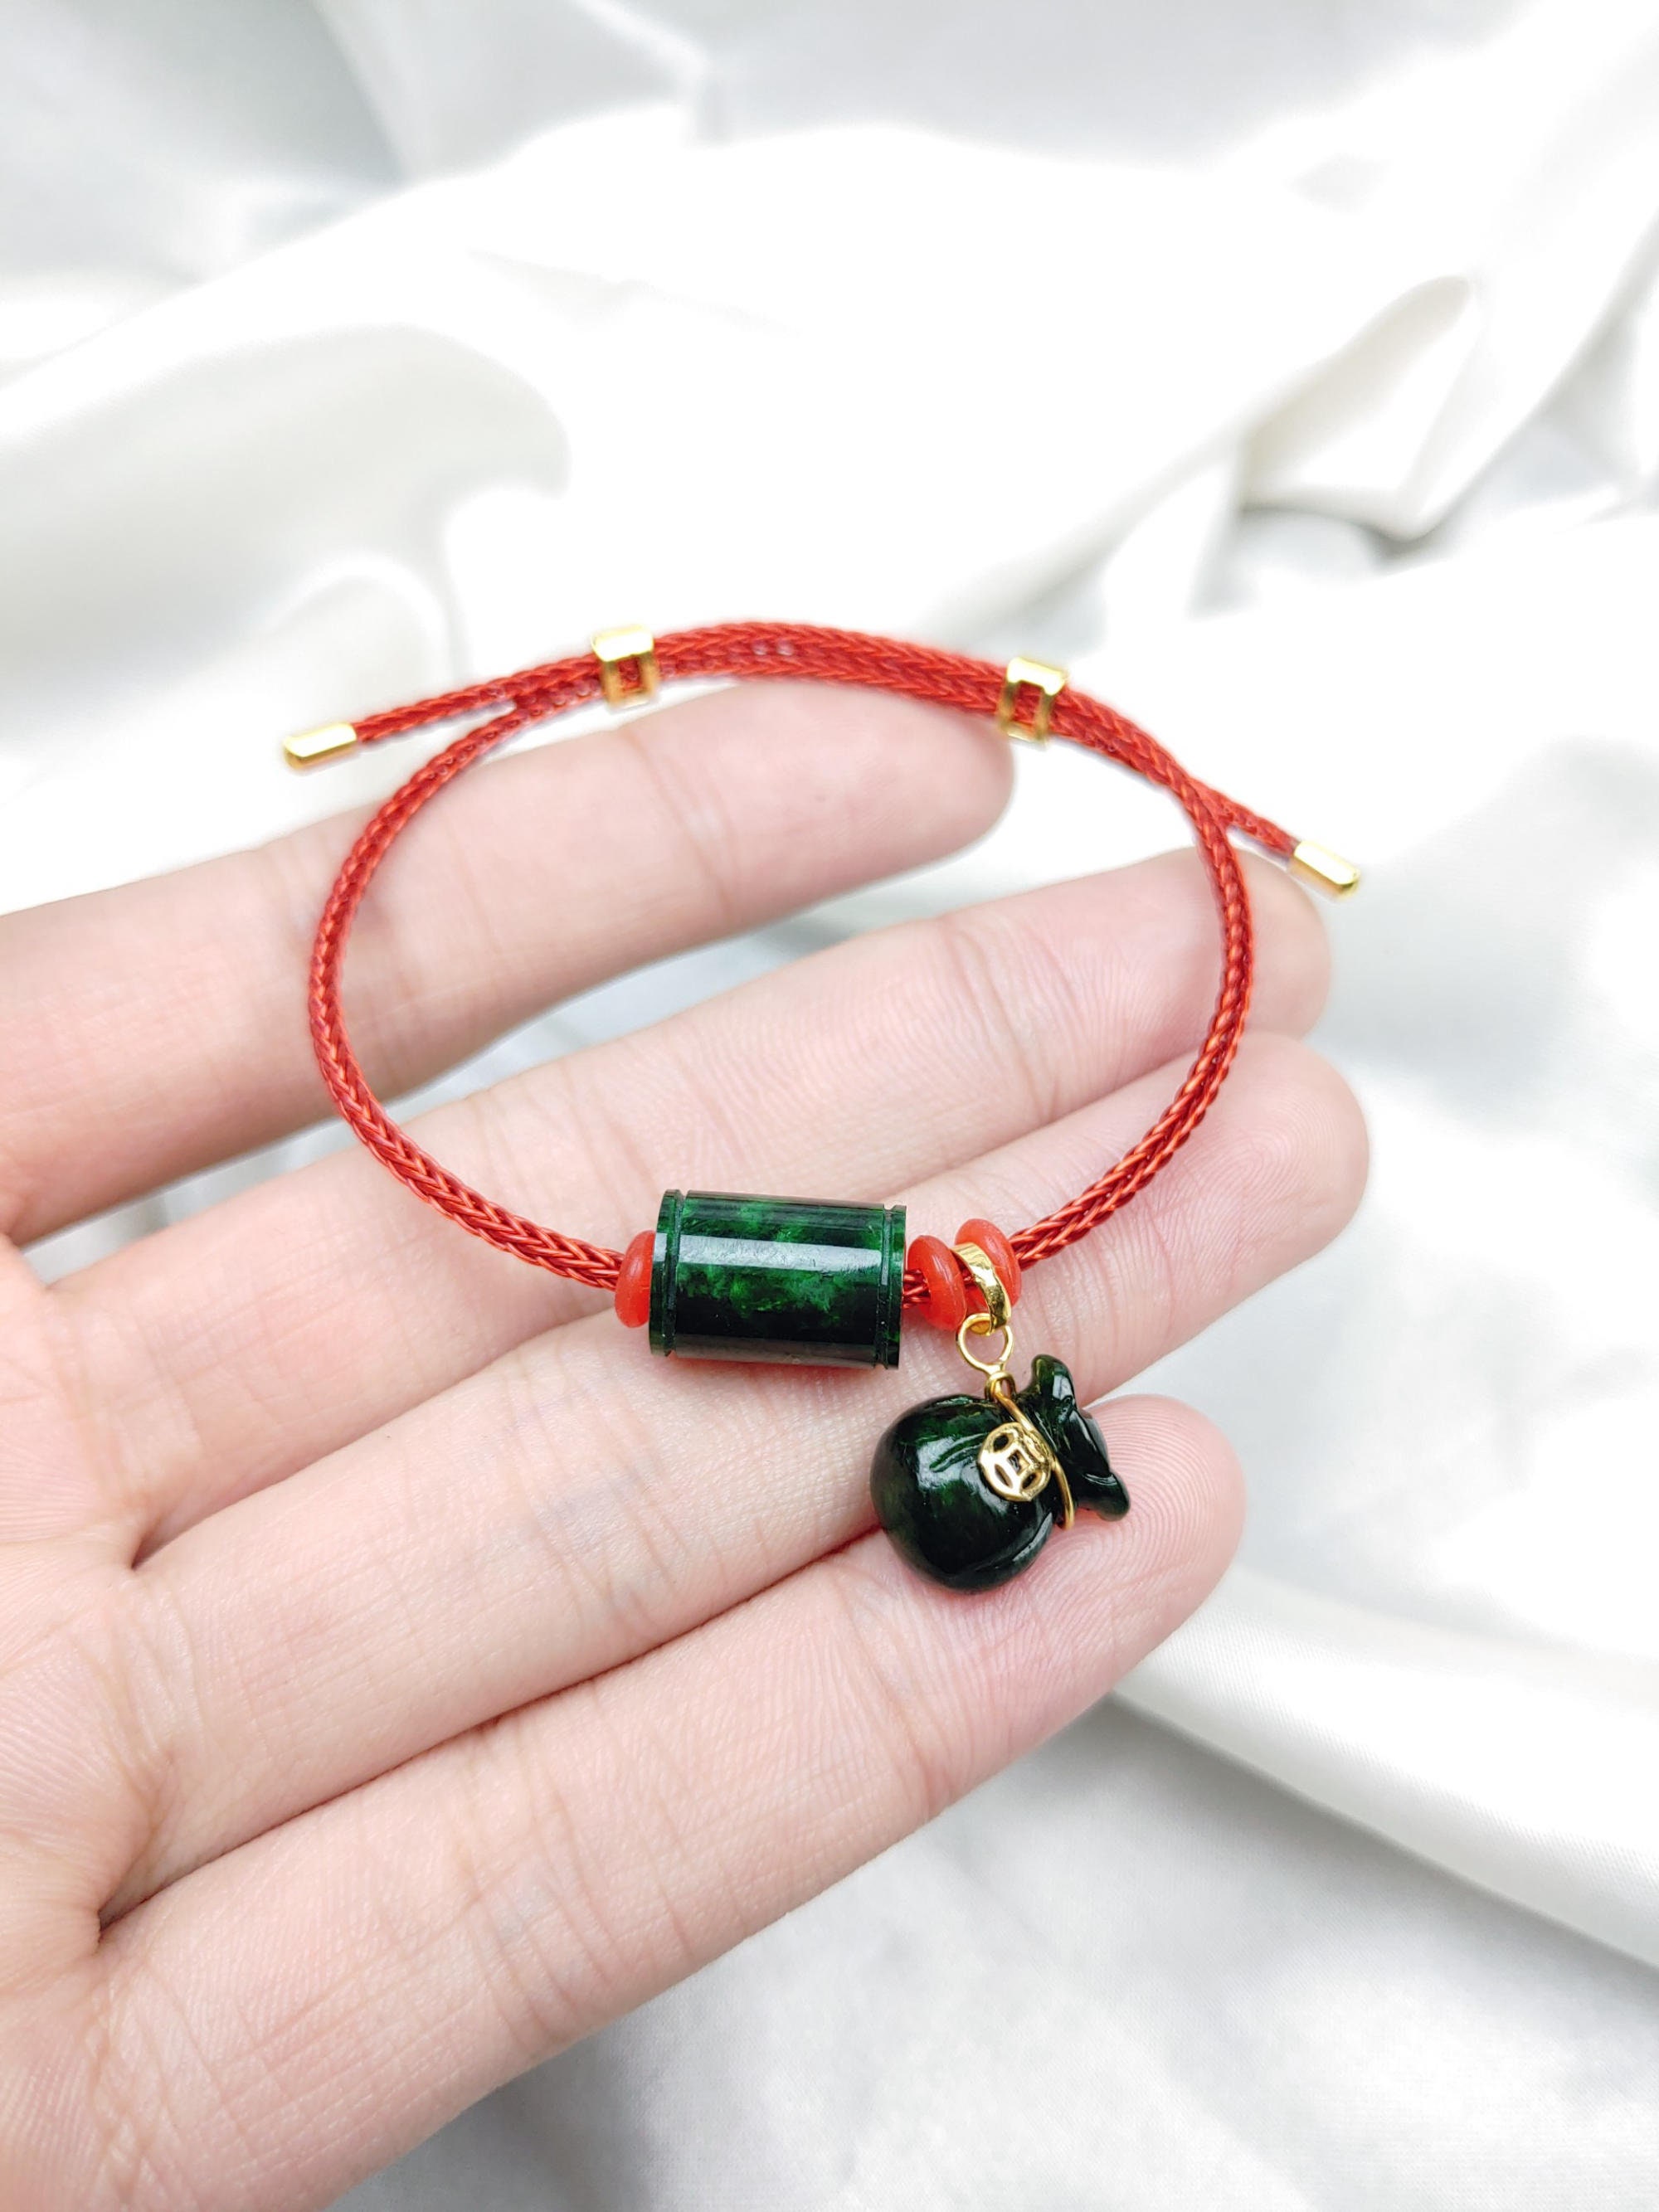 Mulany MB8004 Green Jade with Silver Money Bag Charm Healing Bracelet